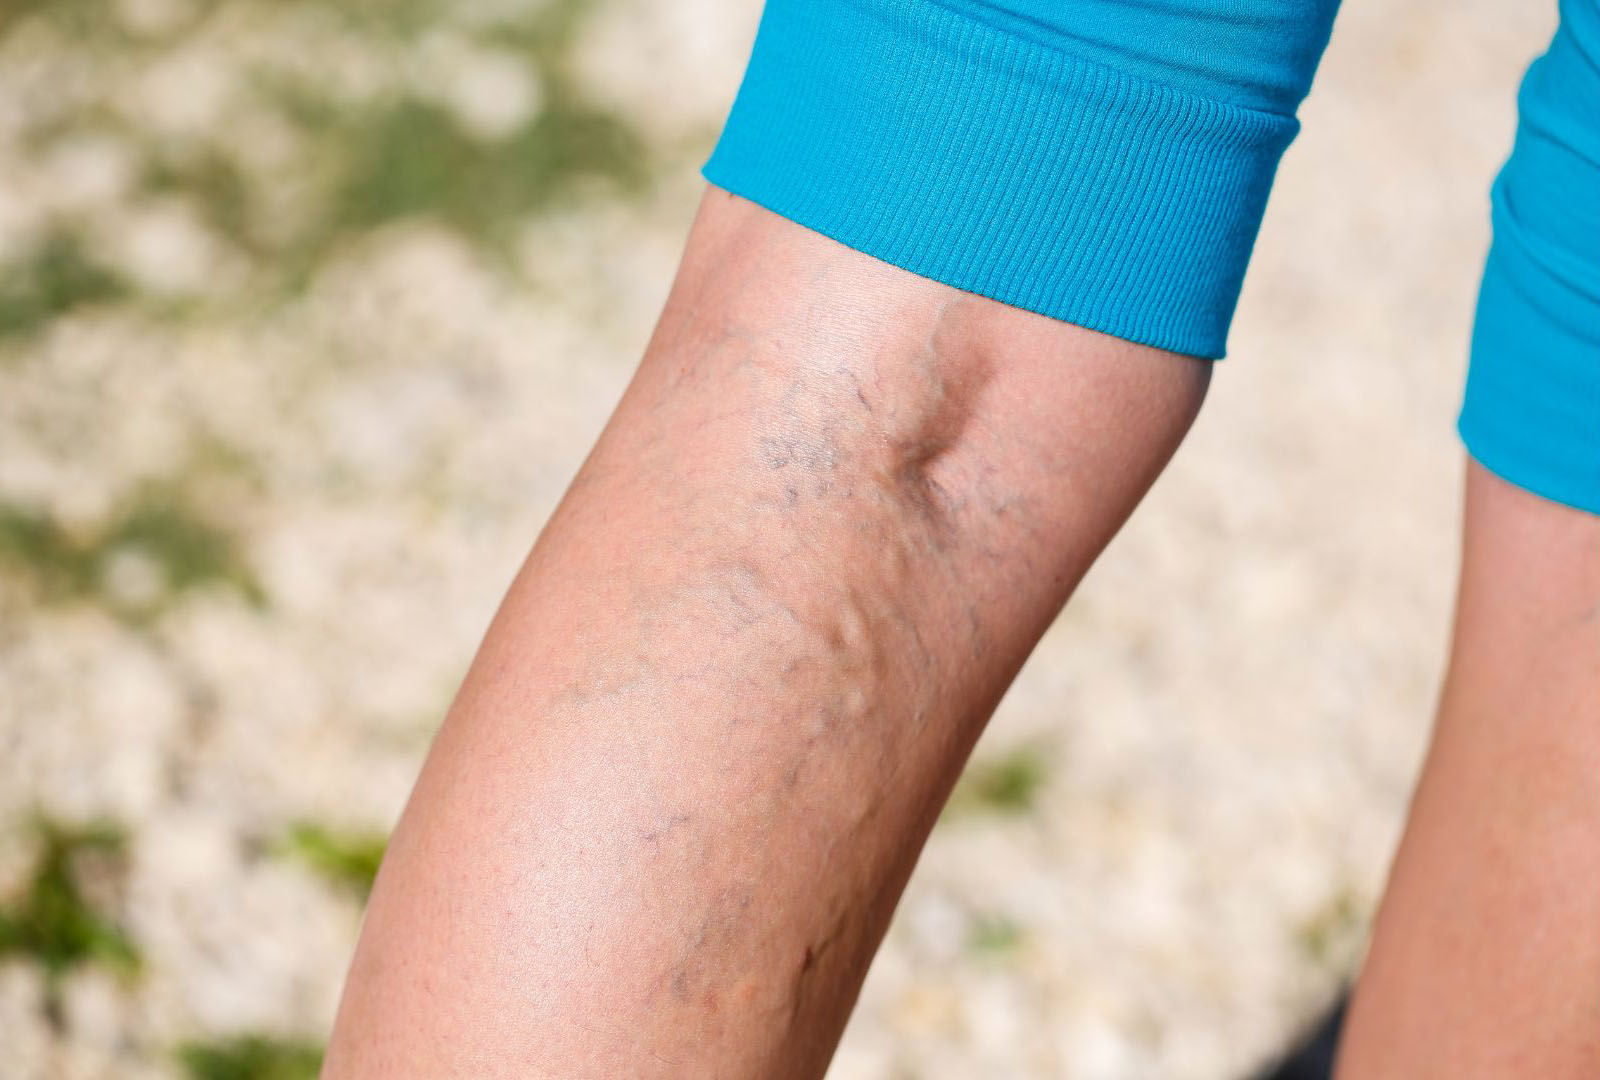 leg showing symptoms of may thurner syndrome such as swollen veins